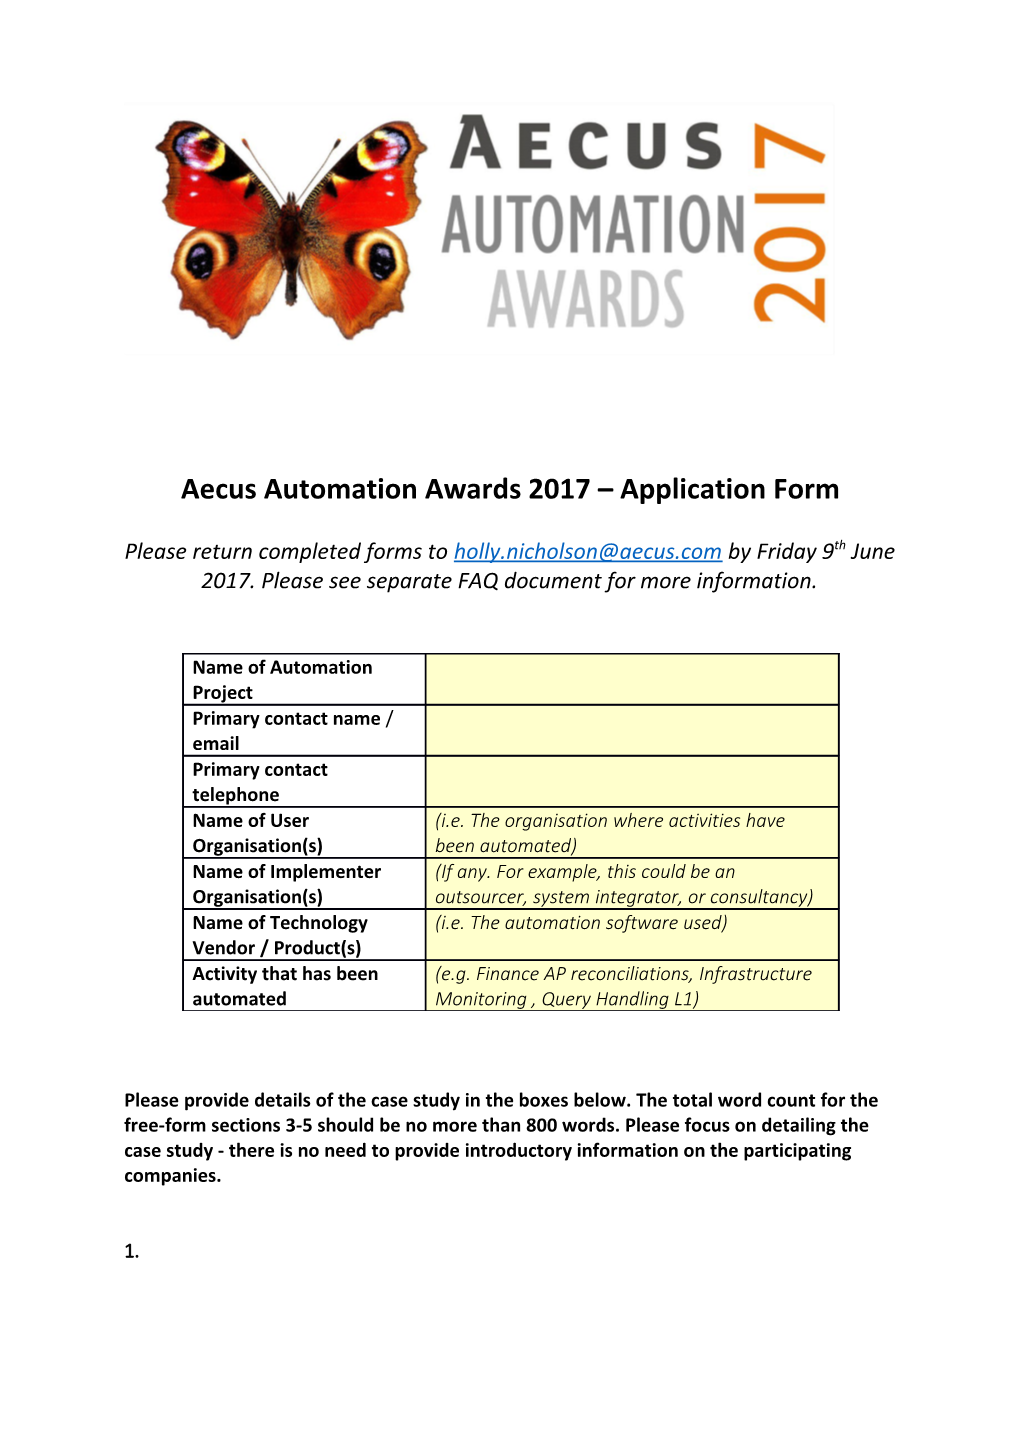 Aecus Automation Awards 2017 Application Form